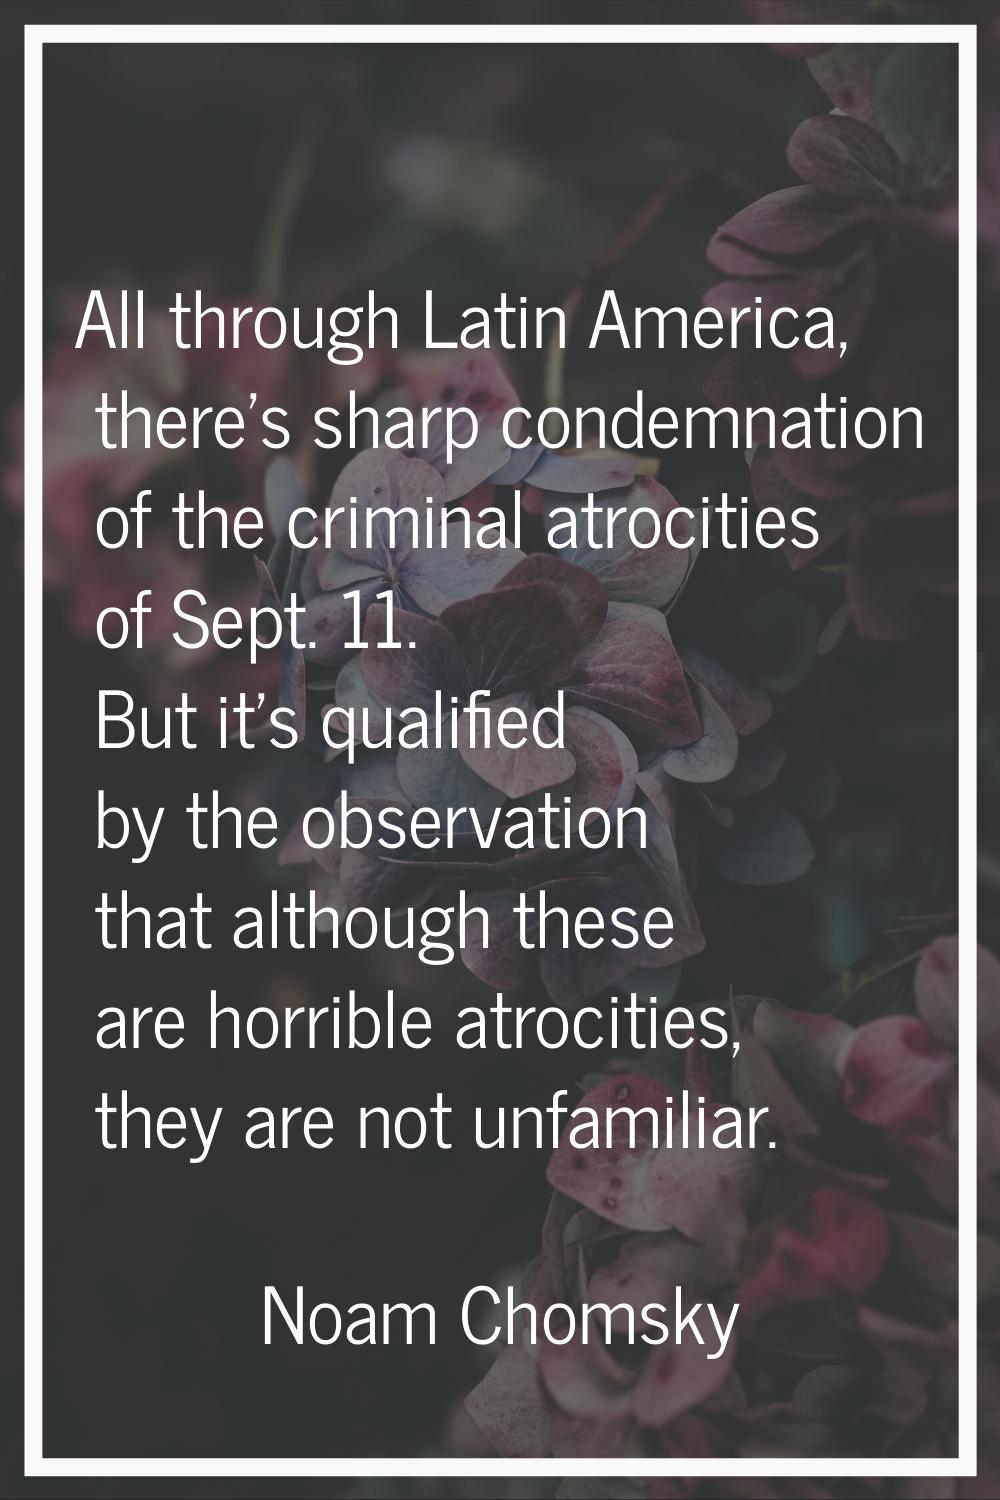 All through Latin America, there's sharp condemnation of the criminal atrocities of Sept. 11. But i